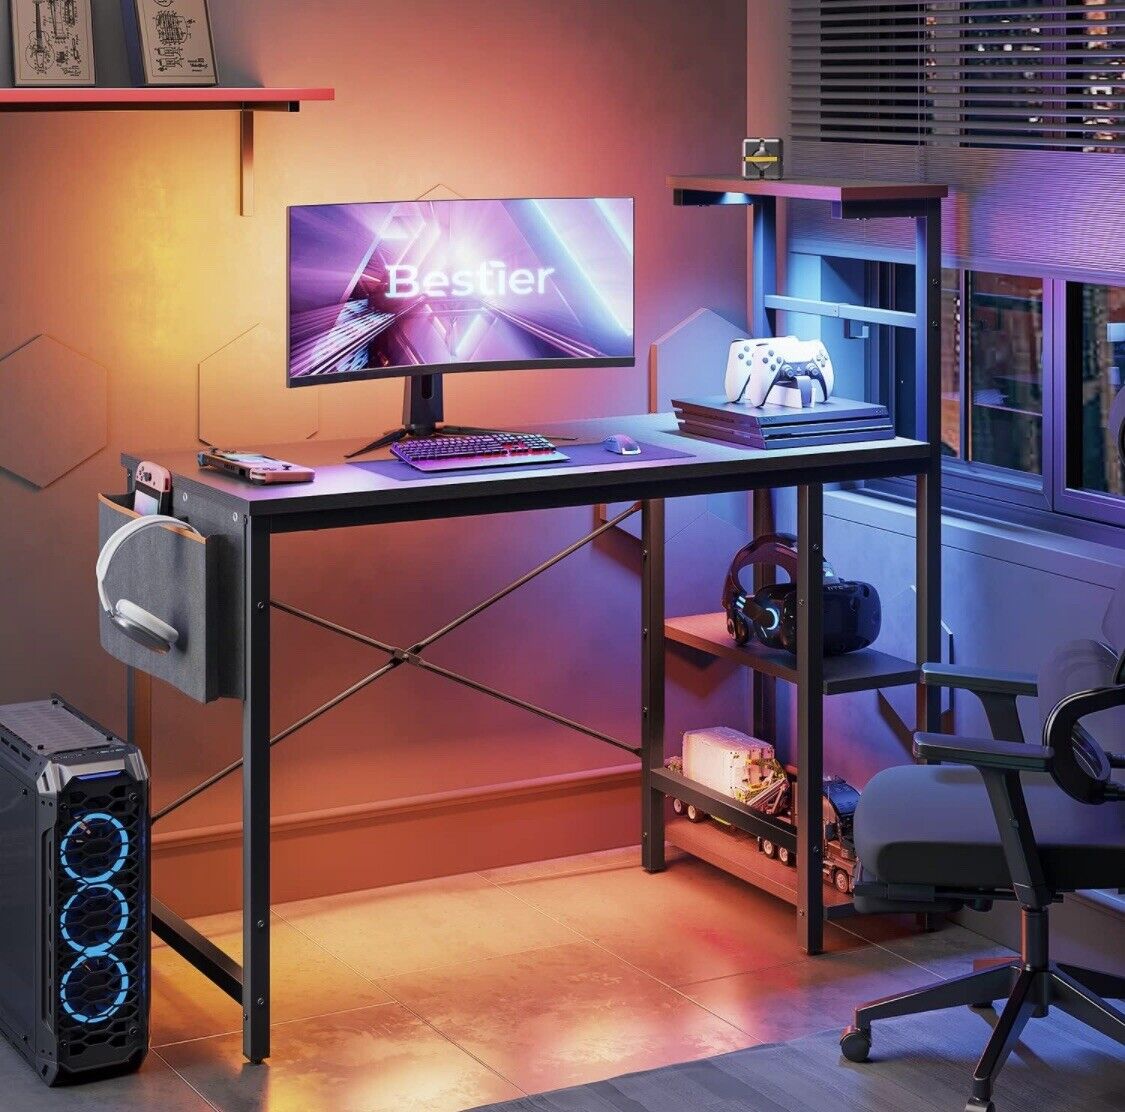 Bestier Computer Desk with LED Lights, 4 Tiers Shelves, 44 Inches Office Desk